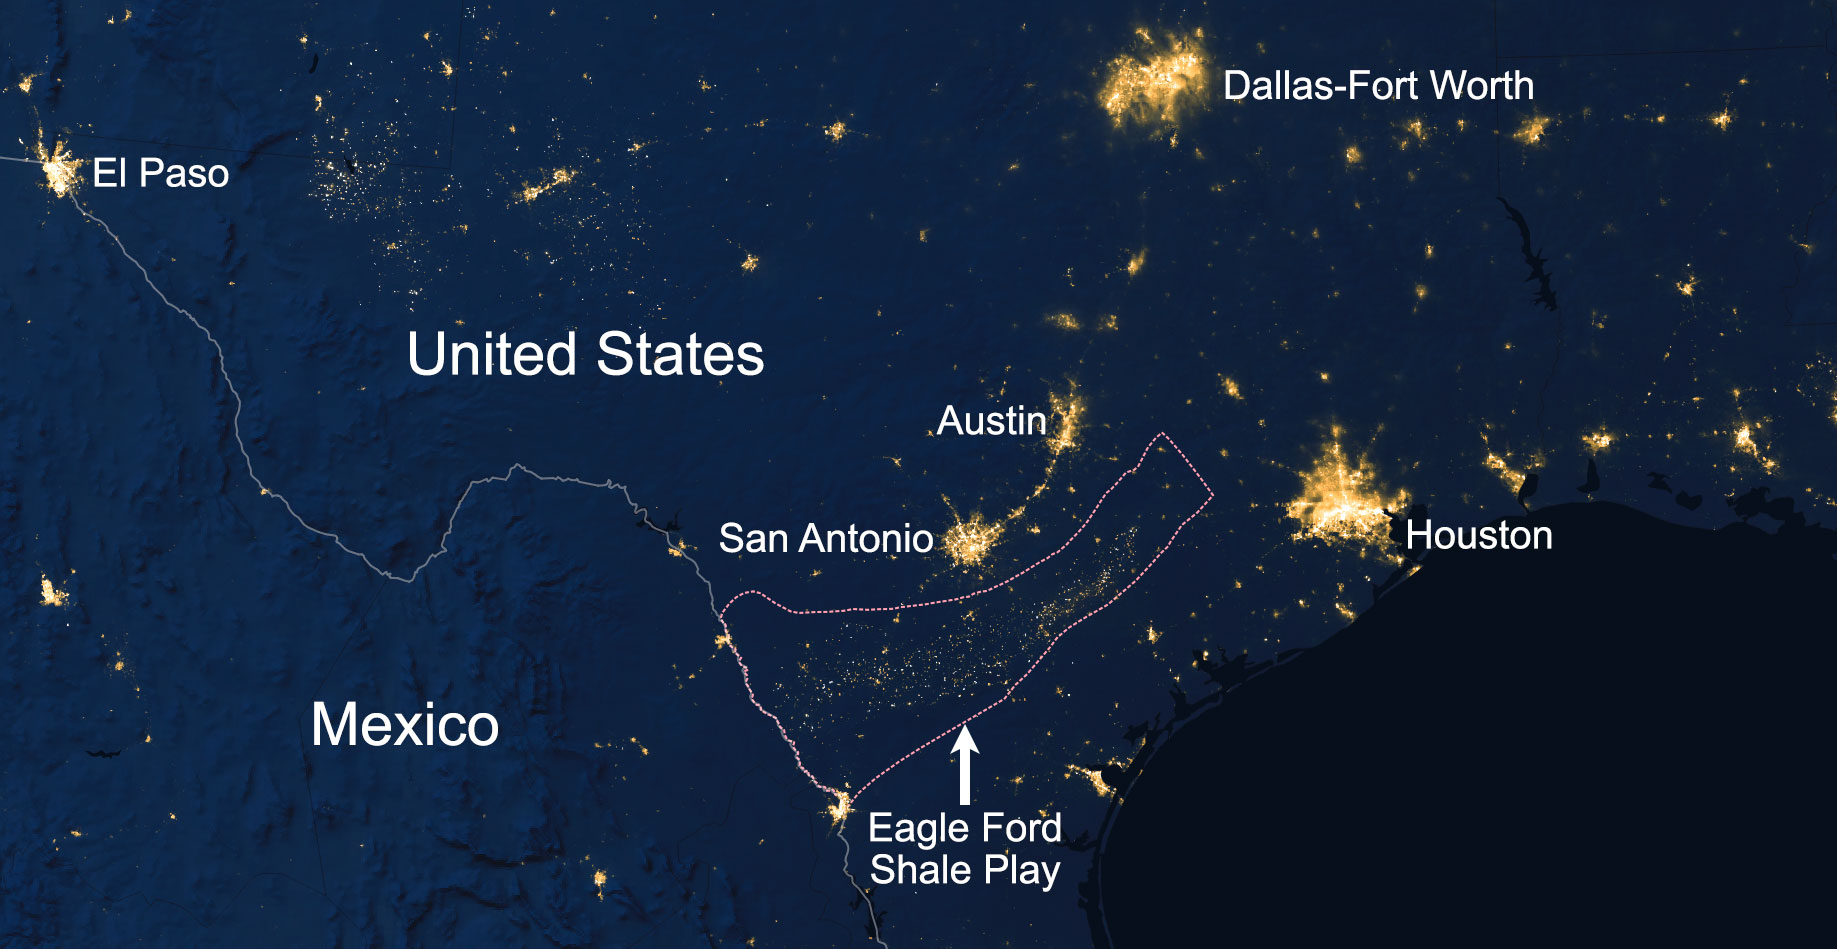 Nighttime satellite image of southern Texas with bright lights indicating areas of development. El Paso, Dallas-Fort Worth, Austin, San Antonio, and Houston are labeled. The Eagle Ford Shale Play in southern Texas is outlined. In the play, a smattering of lights indicates the extent of development associated with the fracking industry.